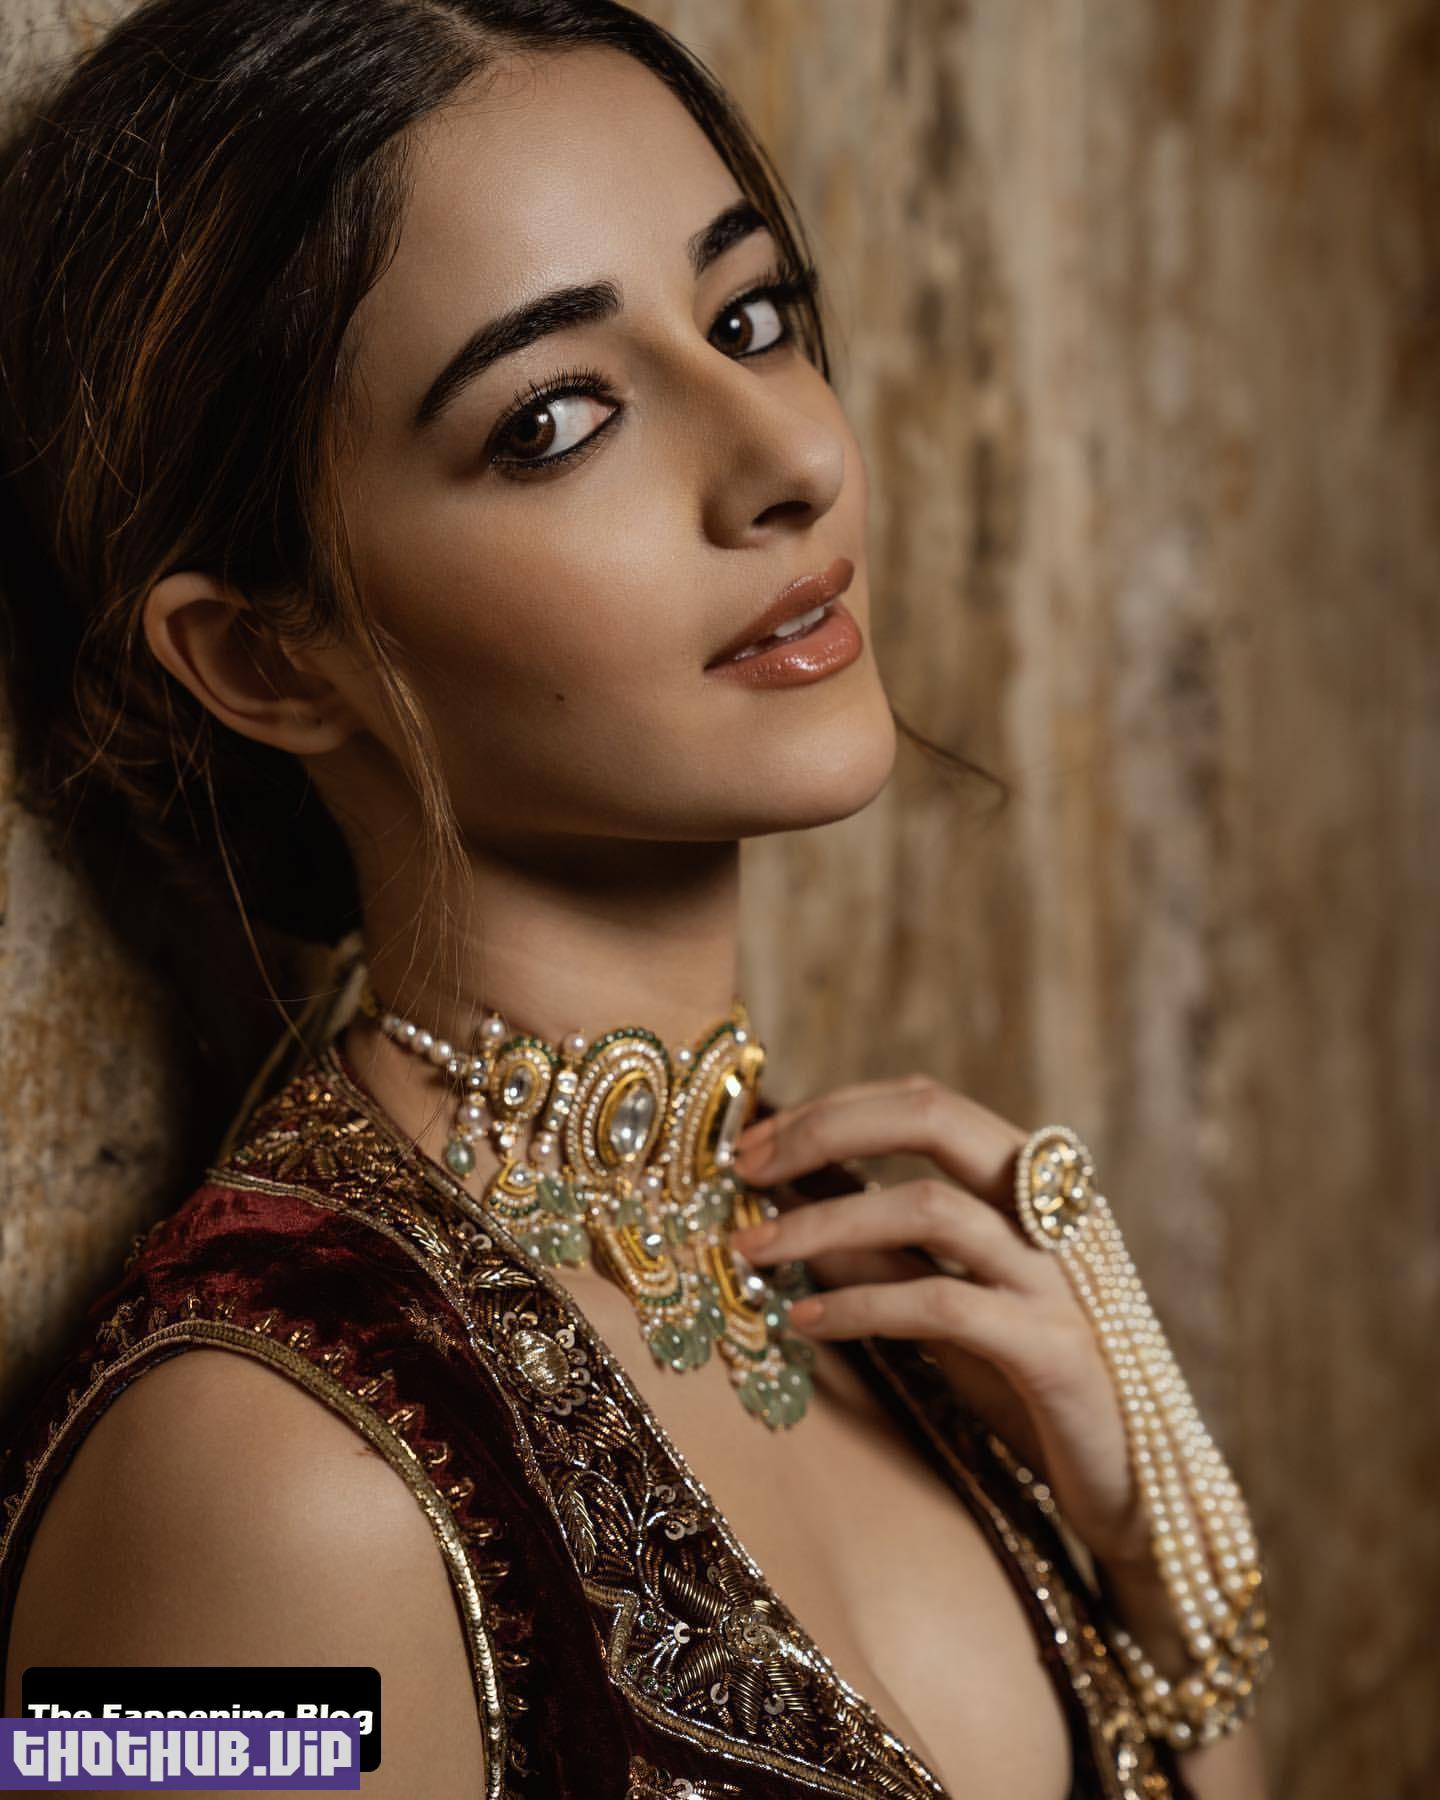 Ananya Panday Sexy The Fappening Blog 22